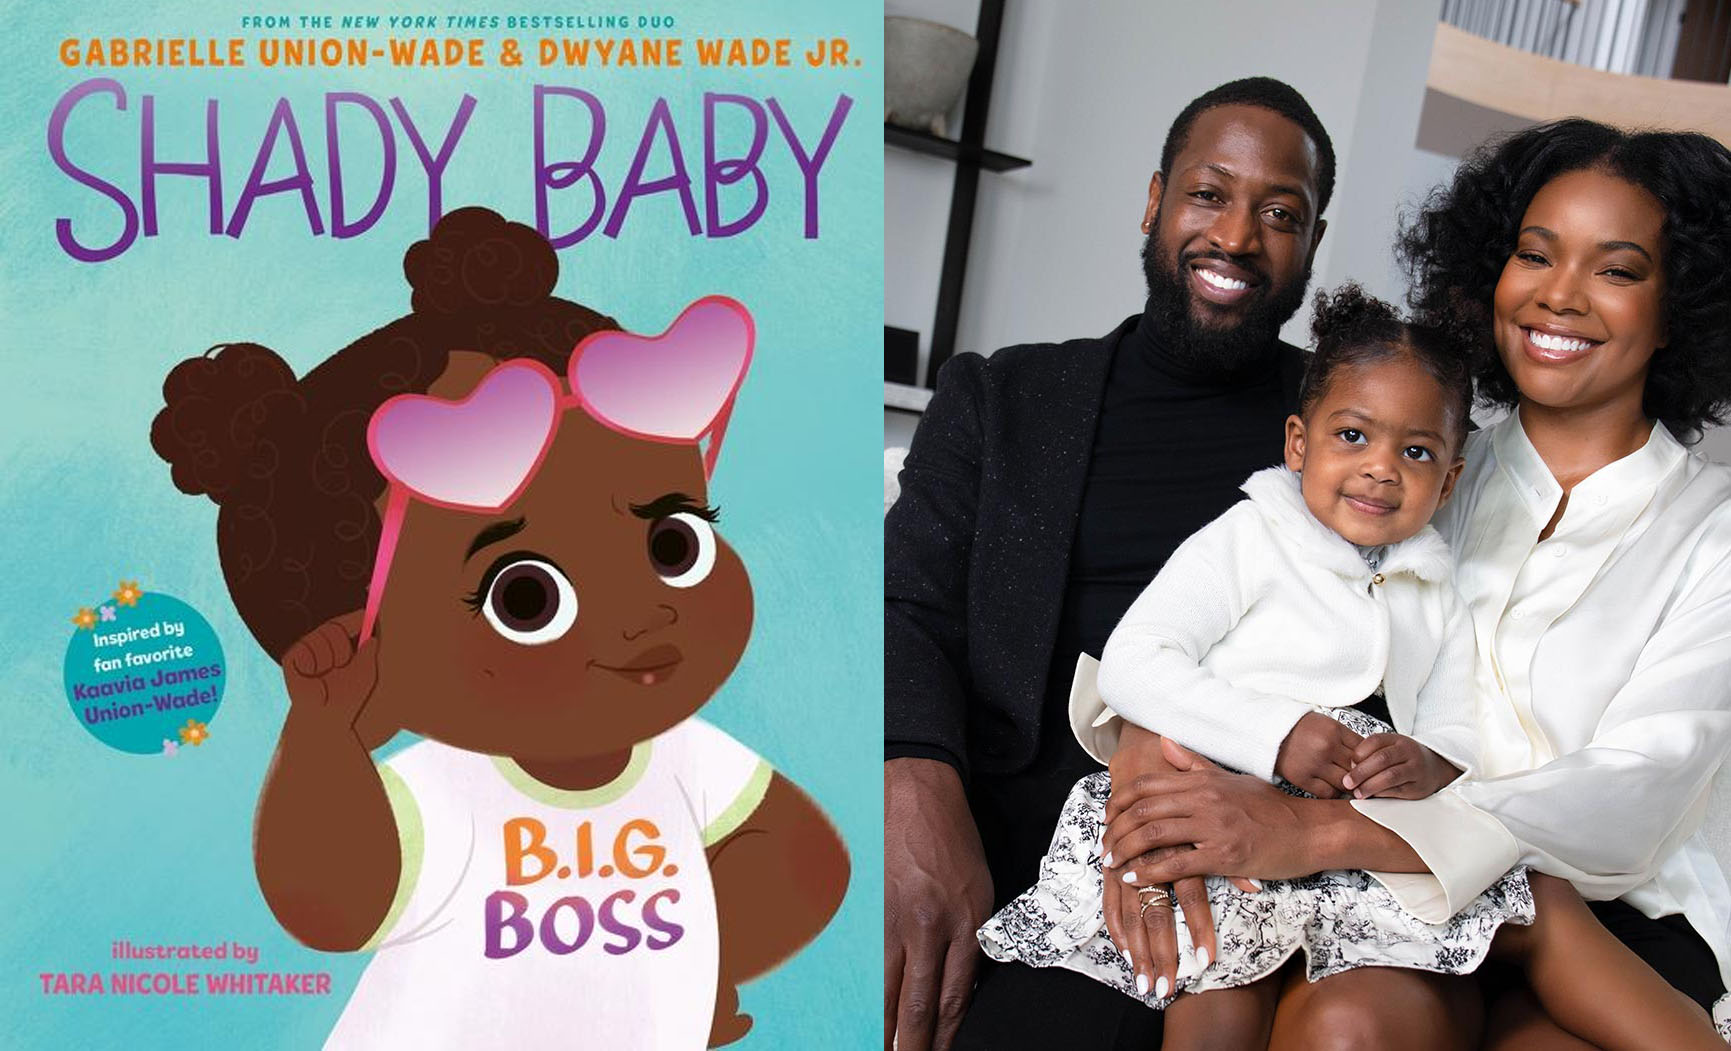 Dwyane Wade And Gabrielle Union’s Book About Their 2-Year-Old, ‘Shady Baby,’ Is Here